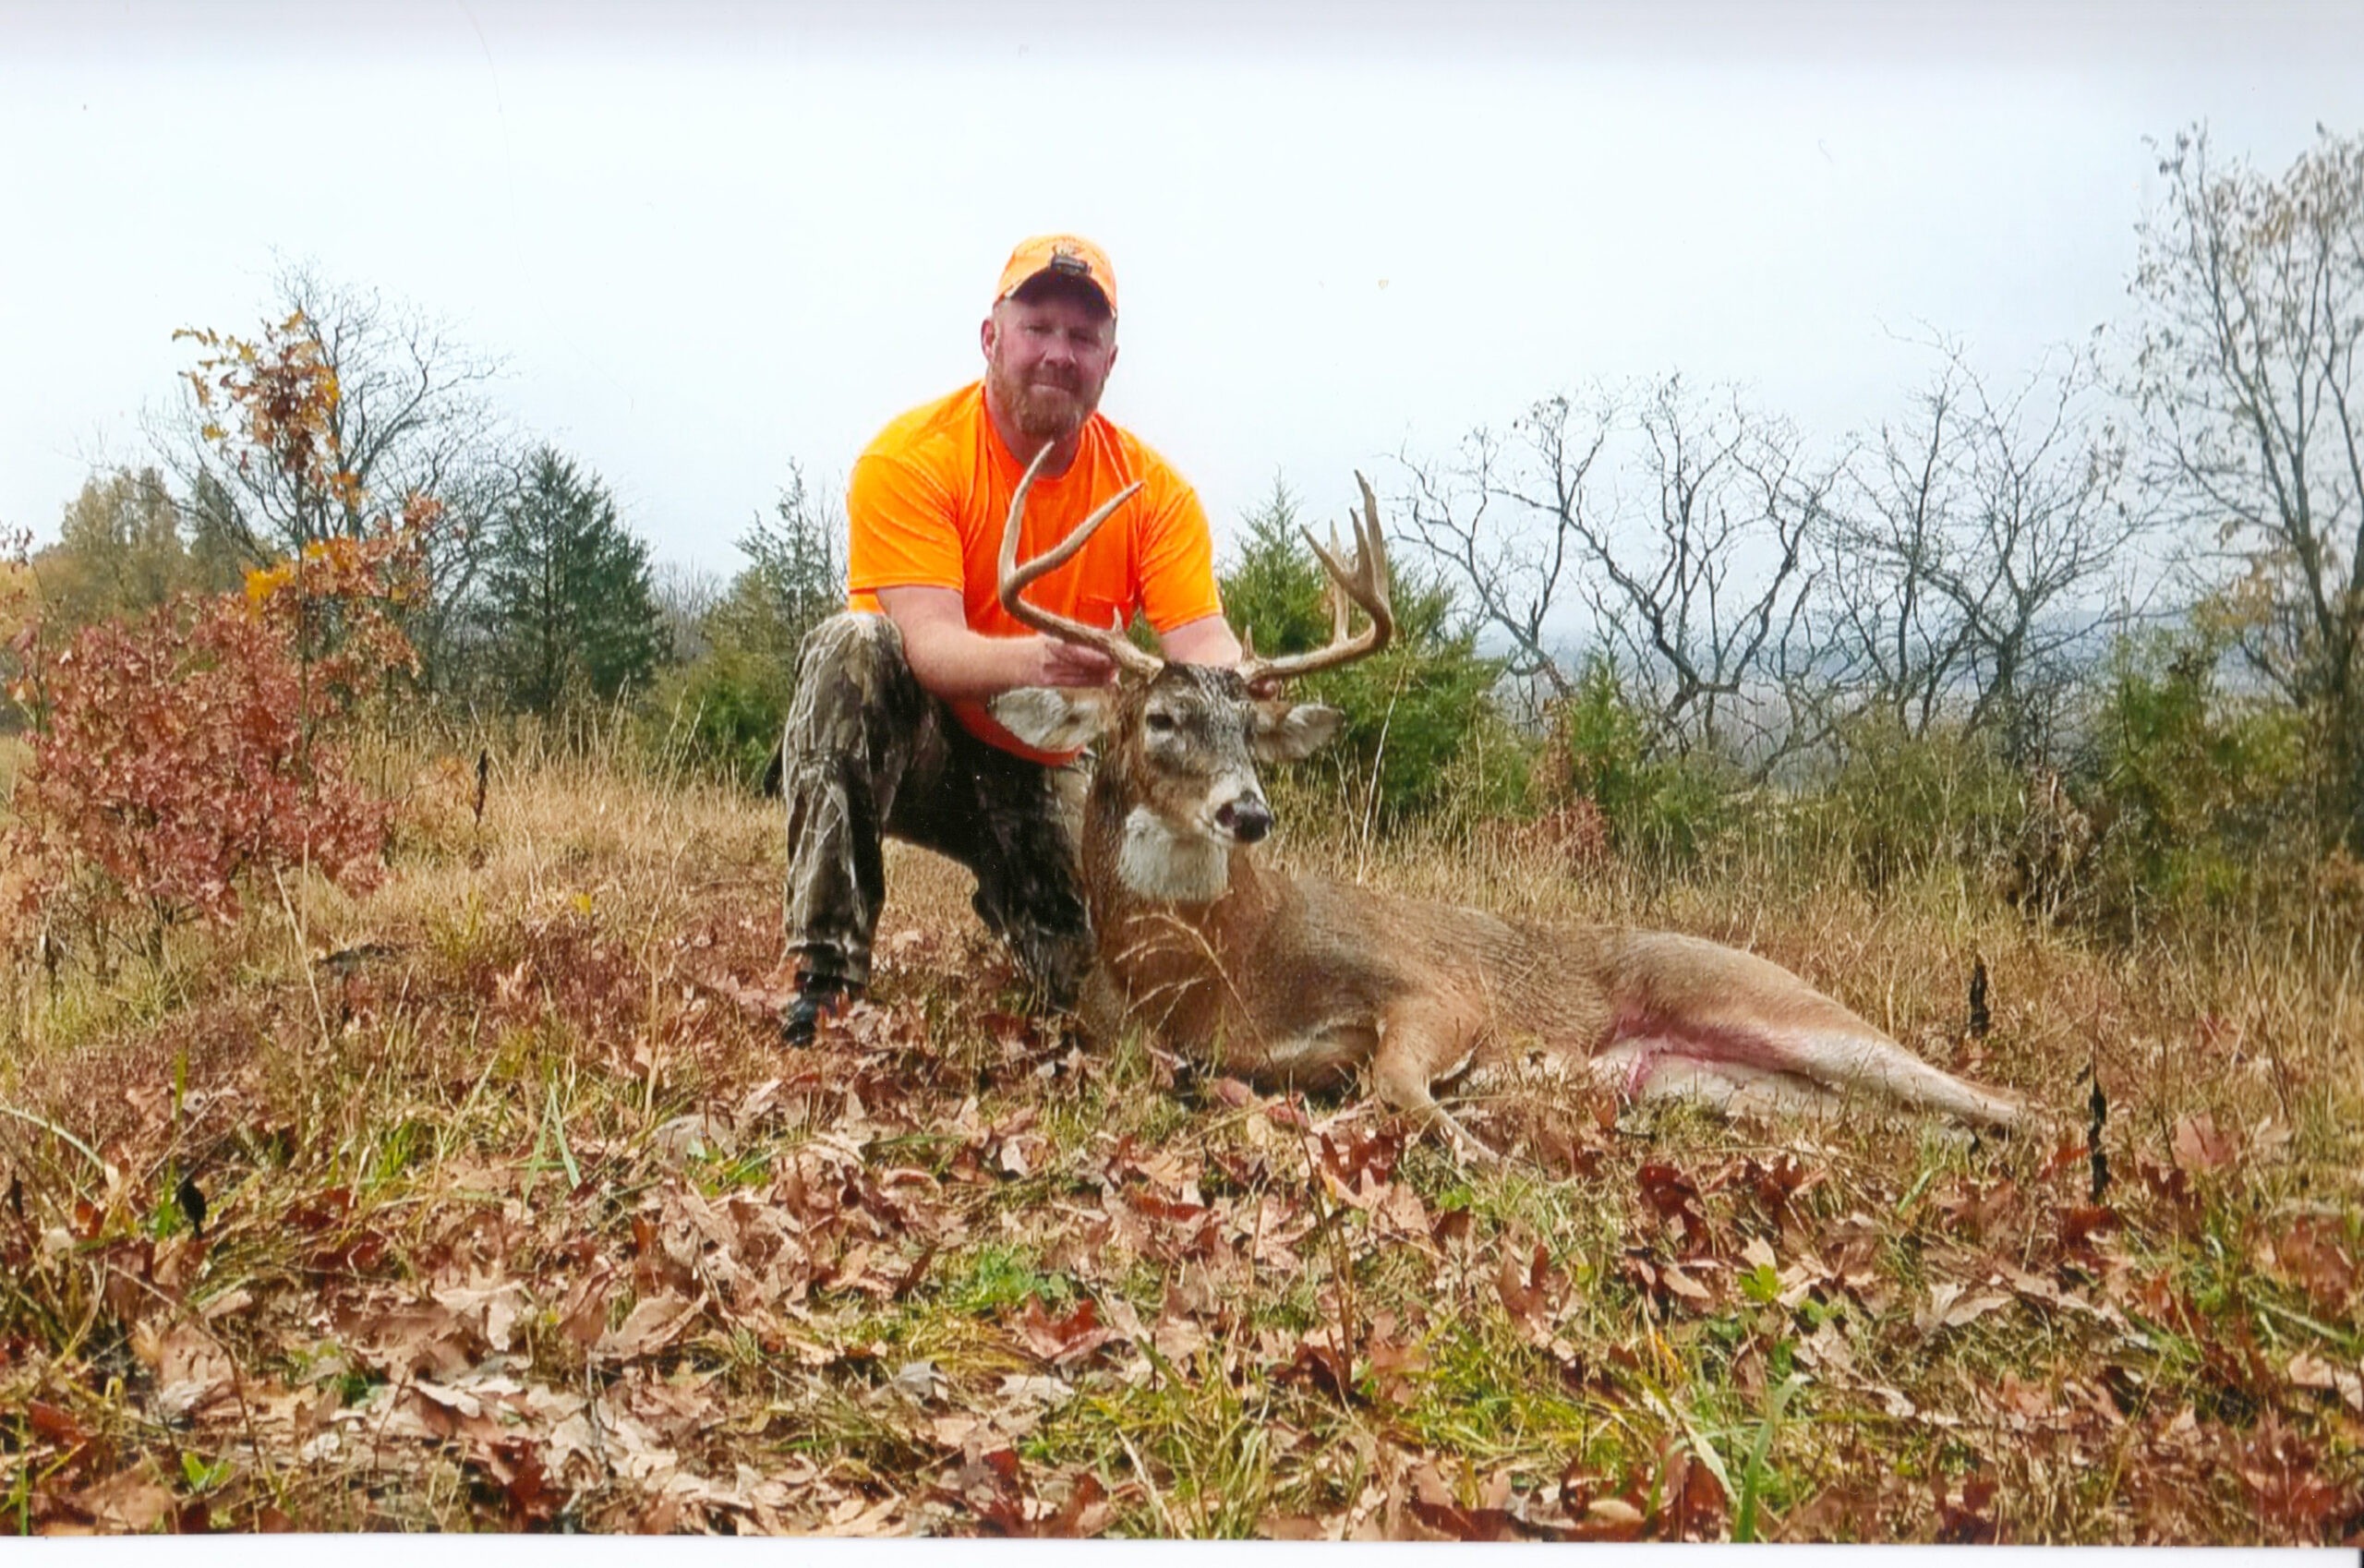 Dates For Indiana Deer Rut 2021 | Calendar Printables Free-2021 Rut Calender For Southern Indiana